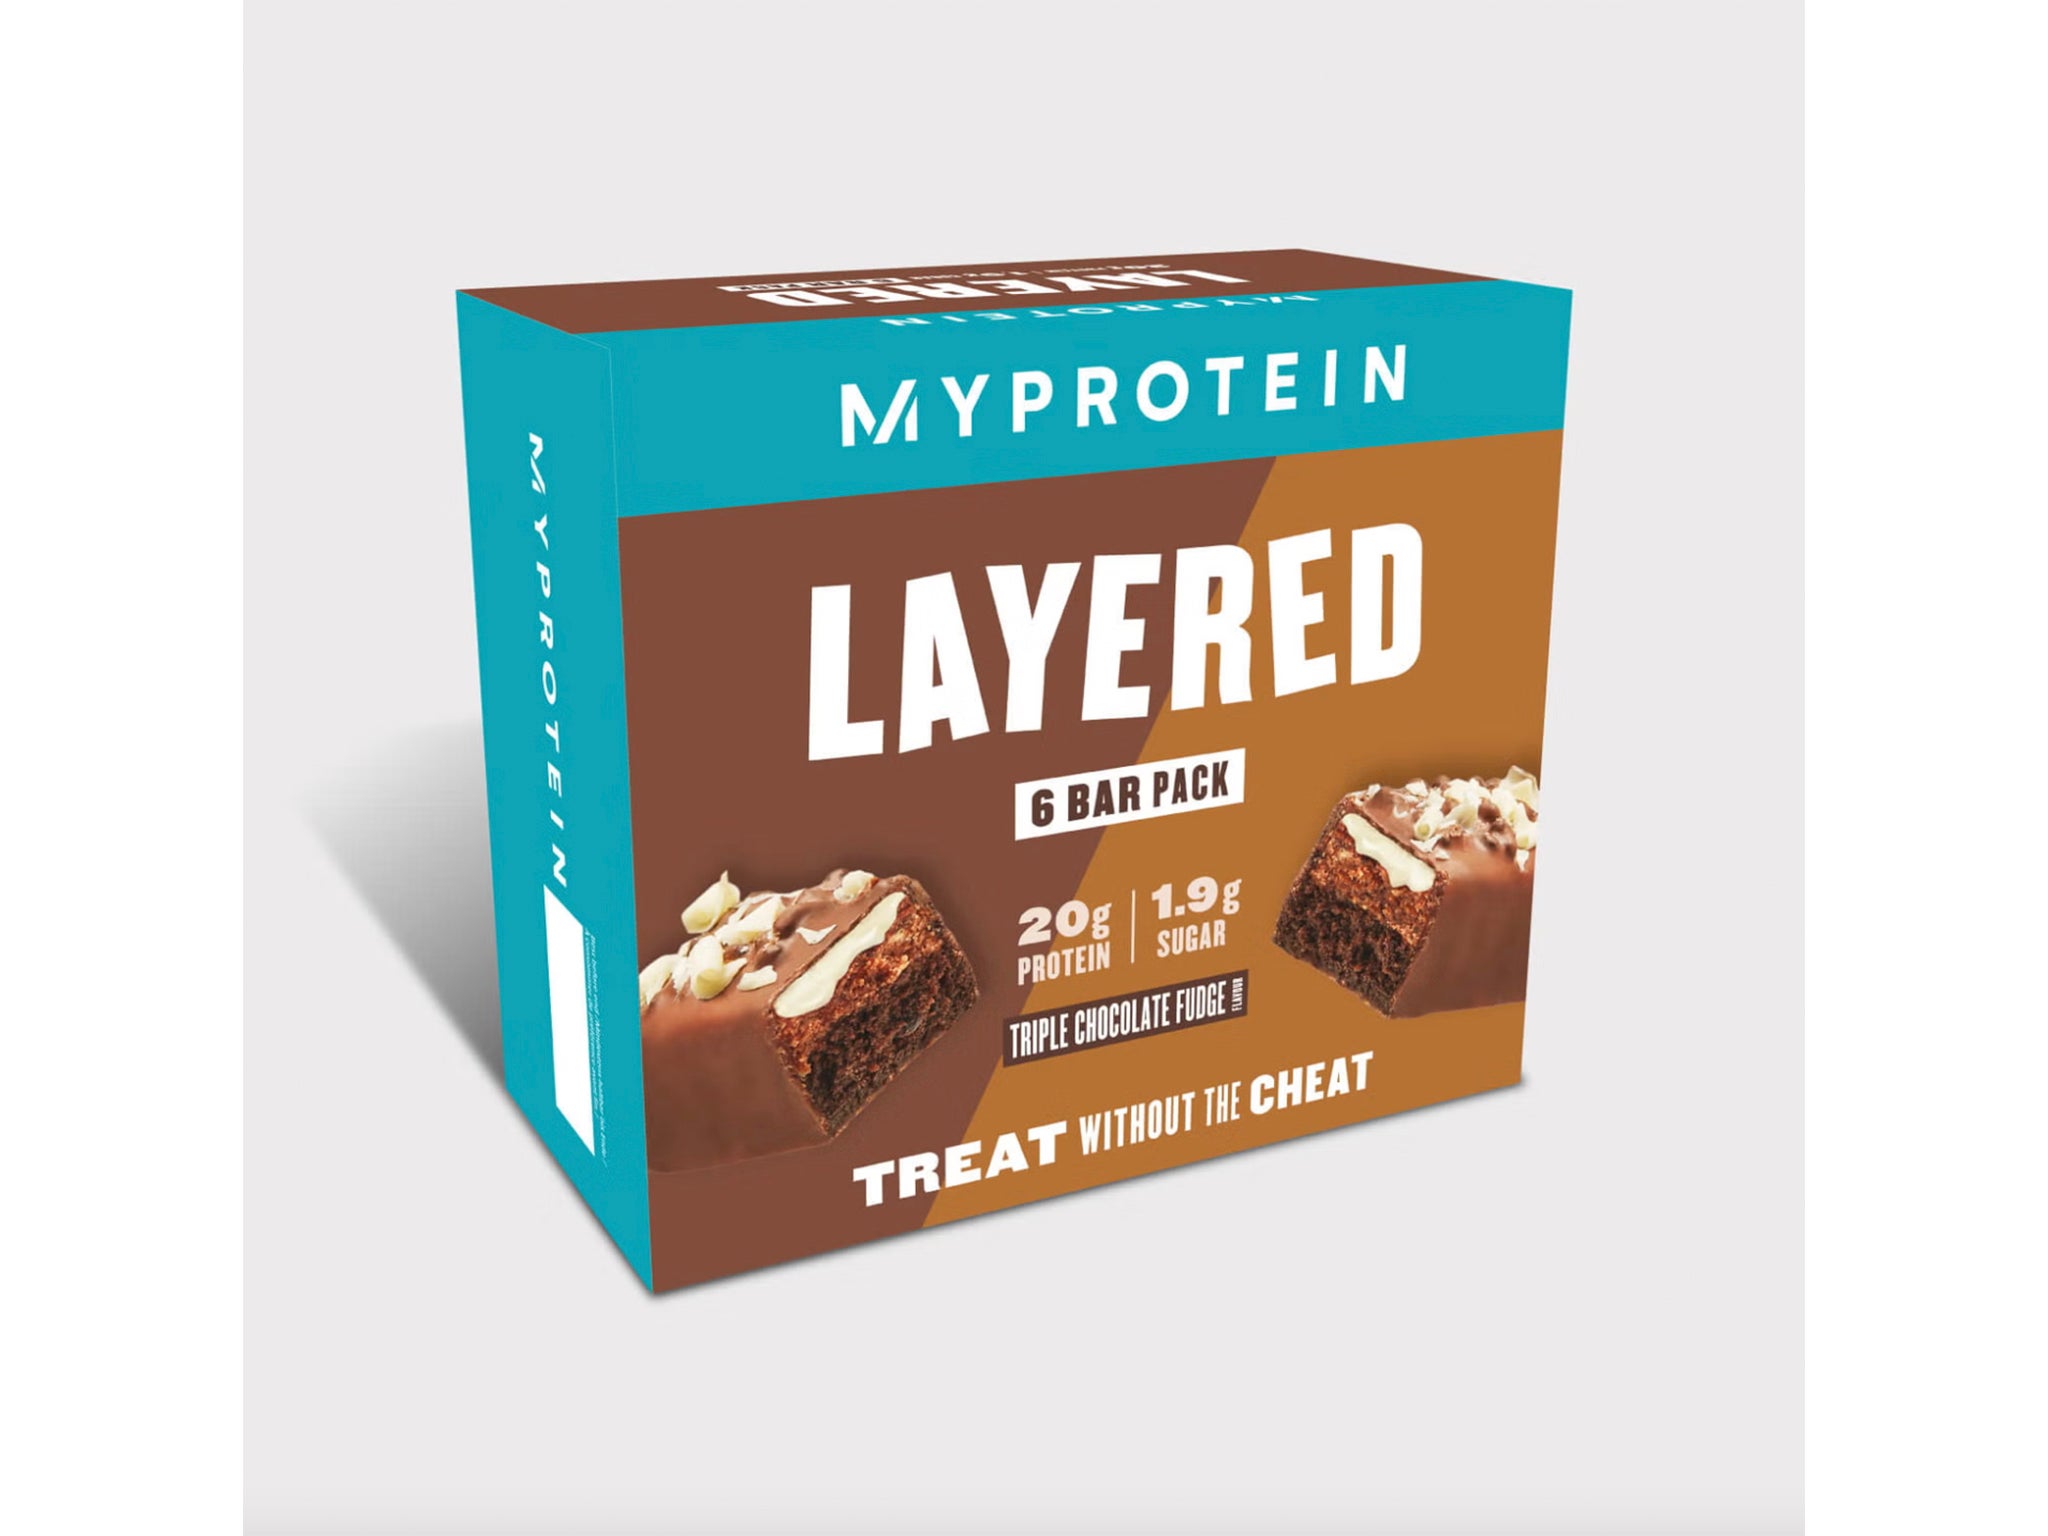 indybest, thg fitness, sport and fitness, the best myprotein deals to shop this week